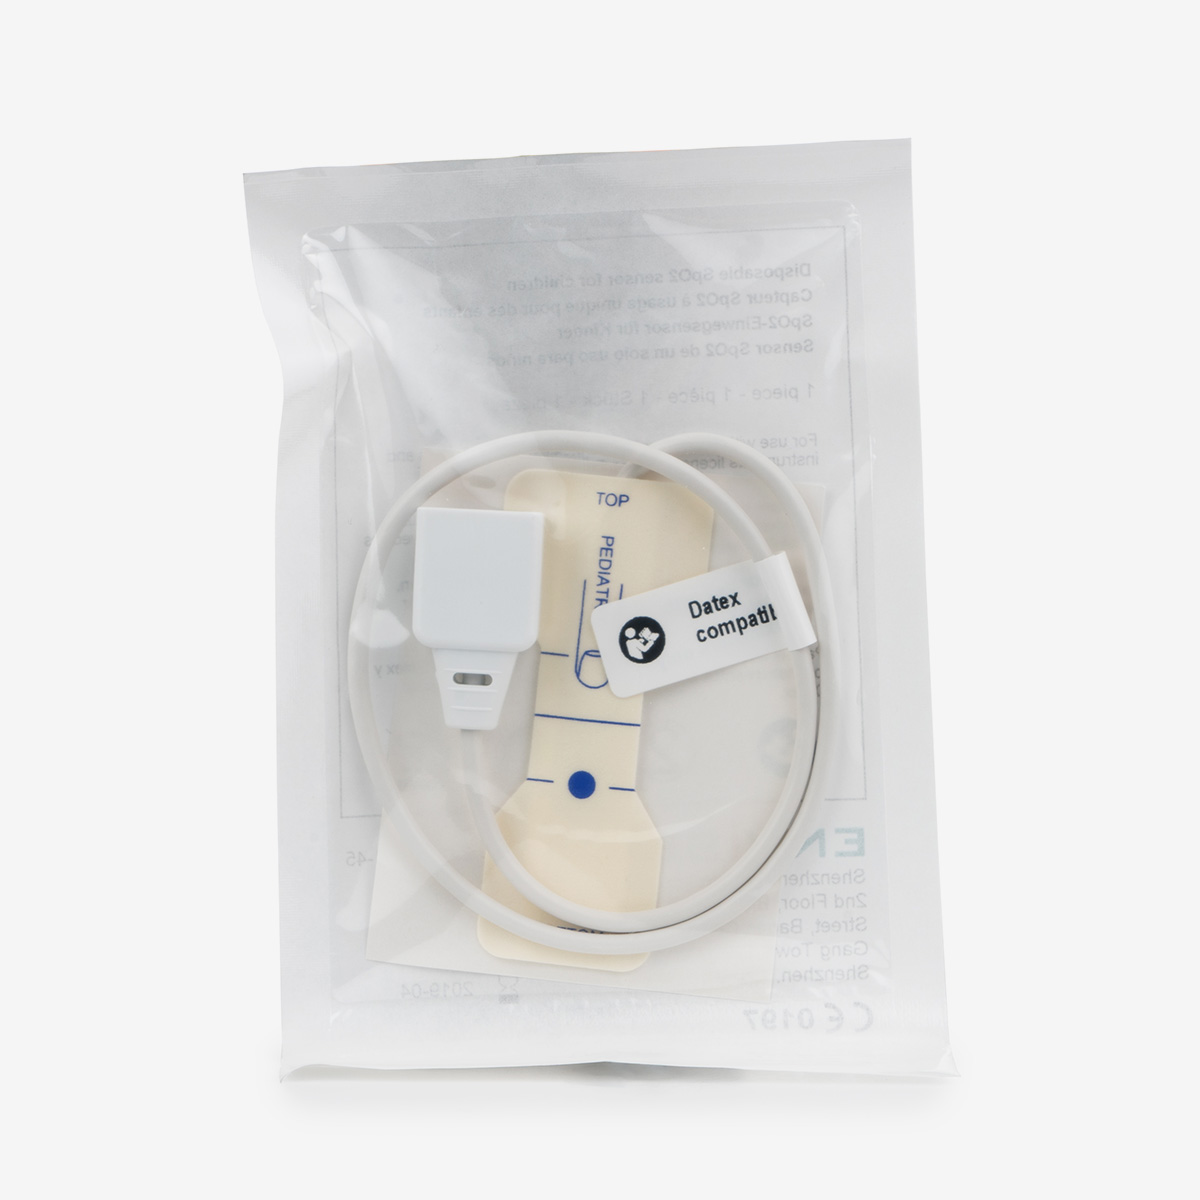 Pediatric Datex Disposable Probe Front in bag on white background